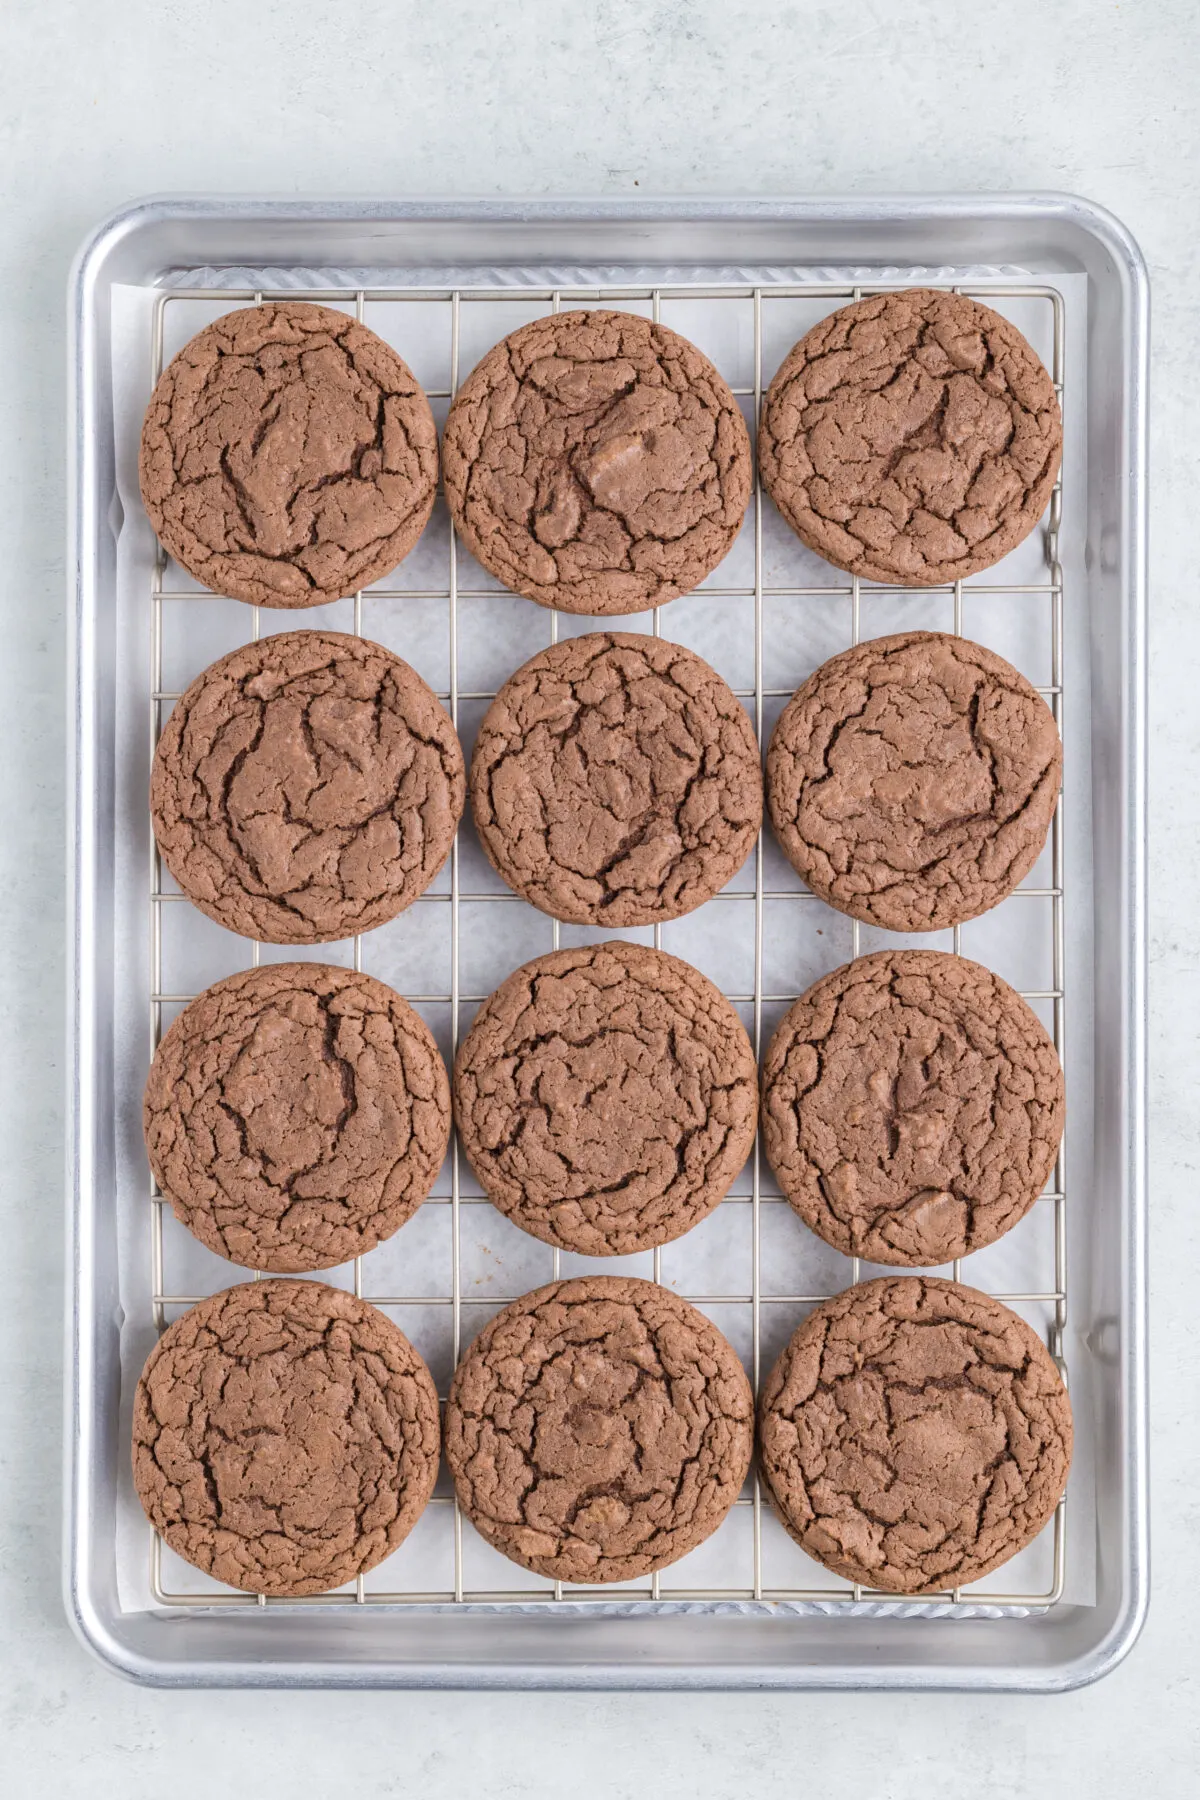 Baked cookies on a wire rack set inside the baking pan.